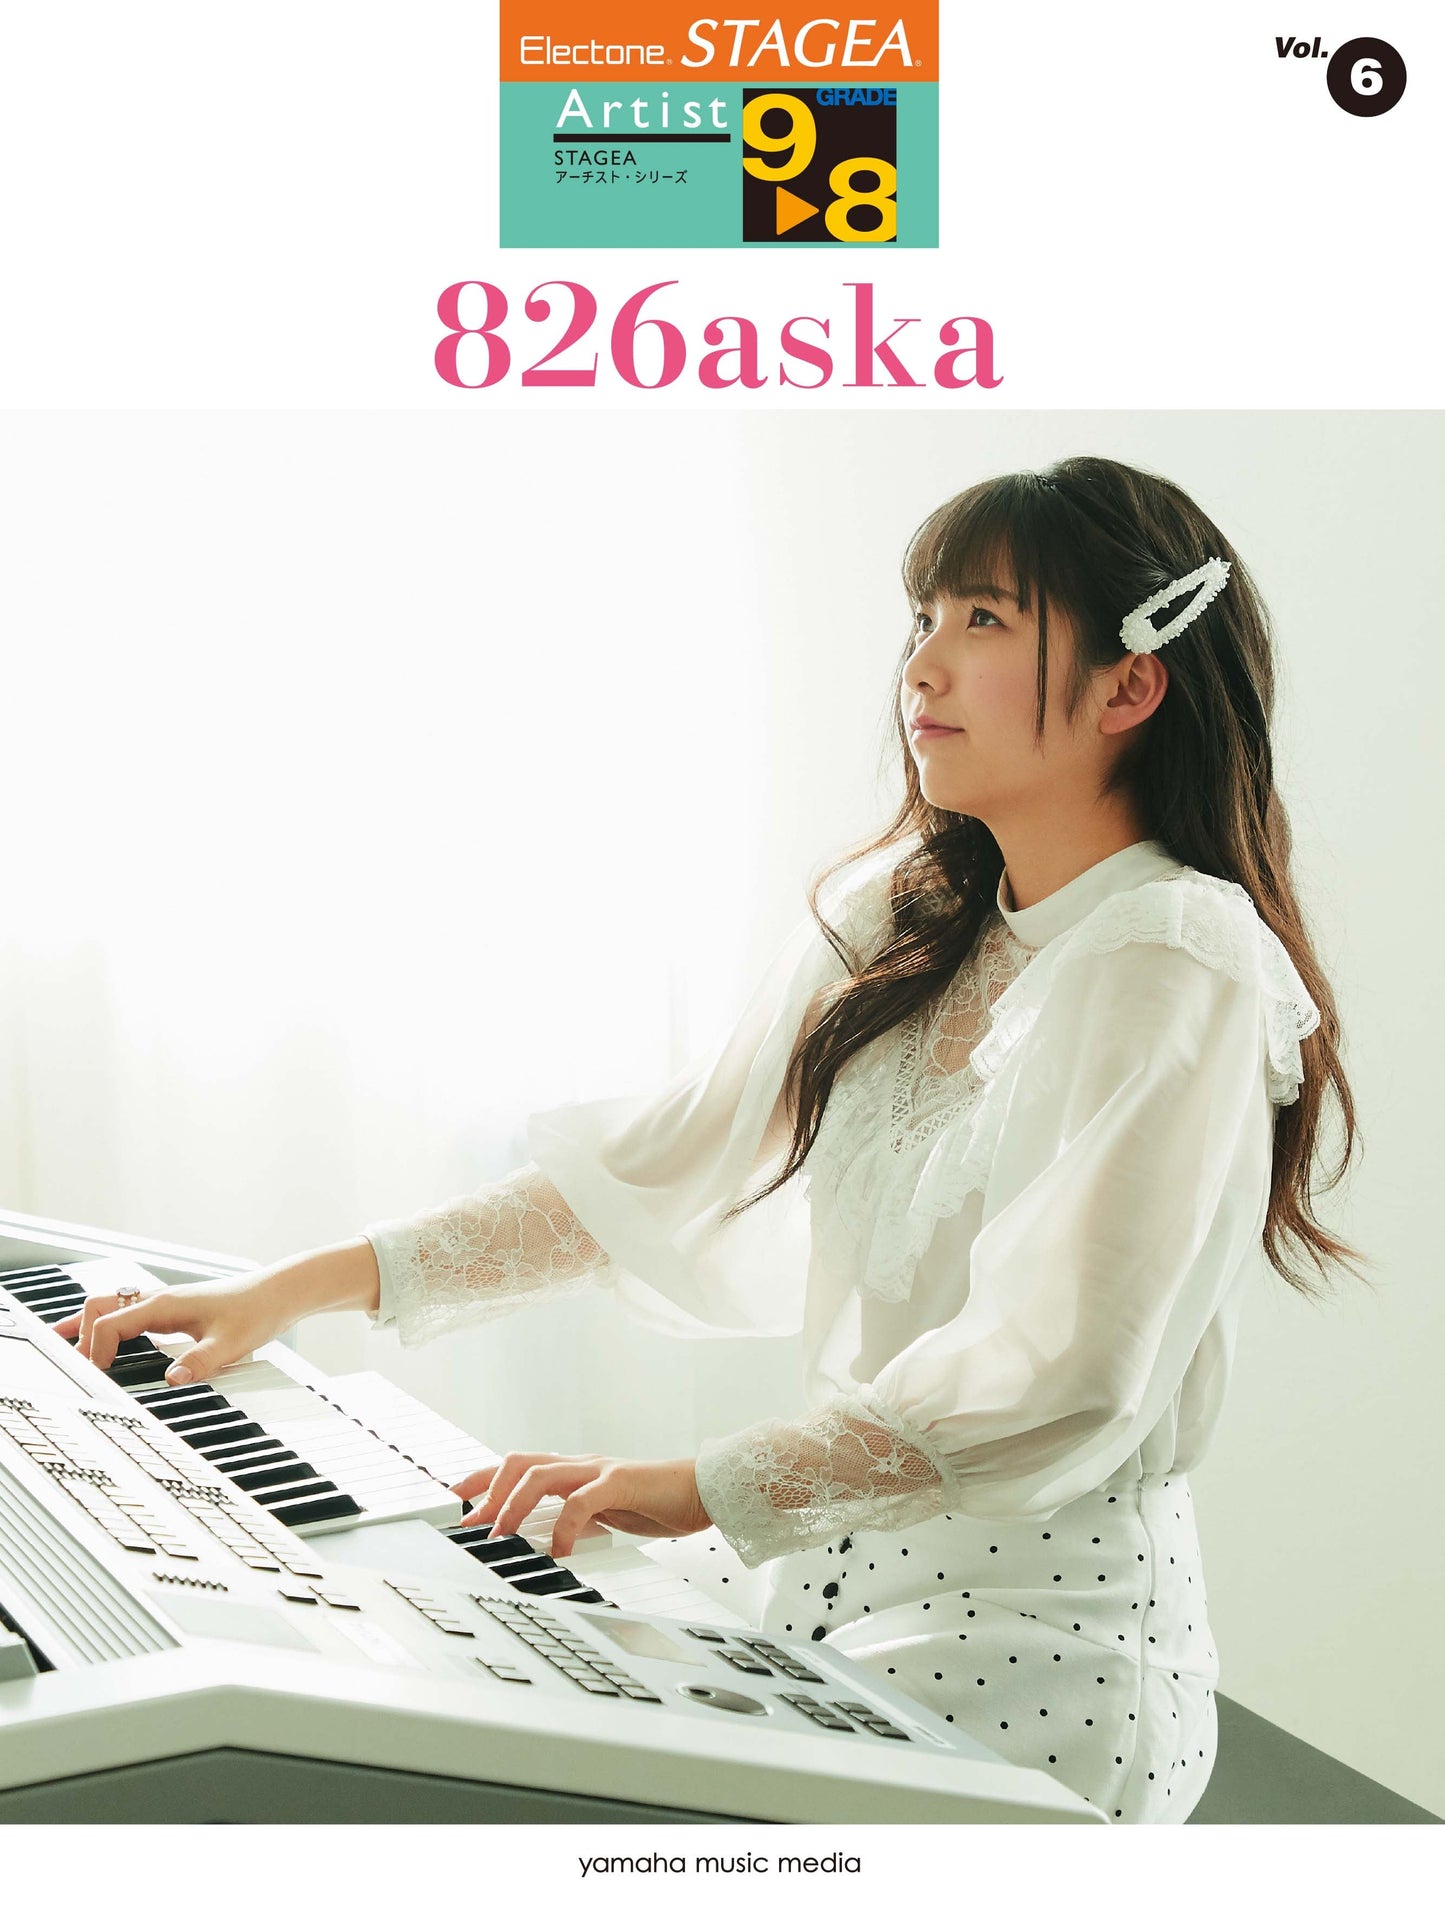 STAGEA アーチスト 9～8級 Vol.6 826aska | ヤマハの楽譜通販サイト Sheet Music Store